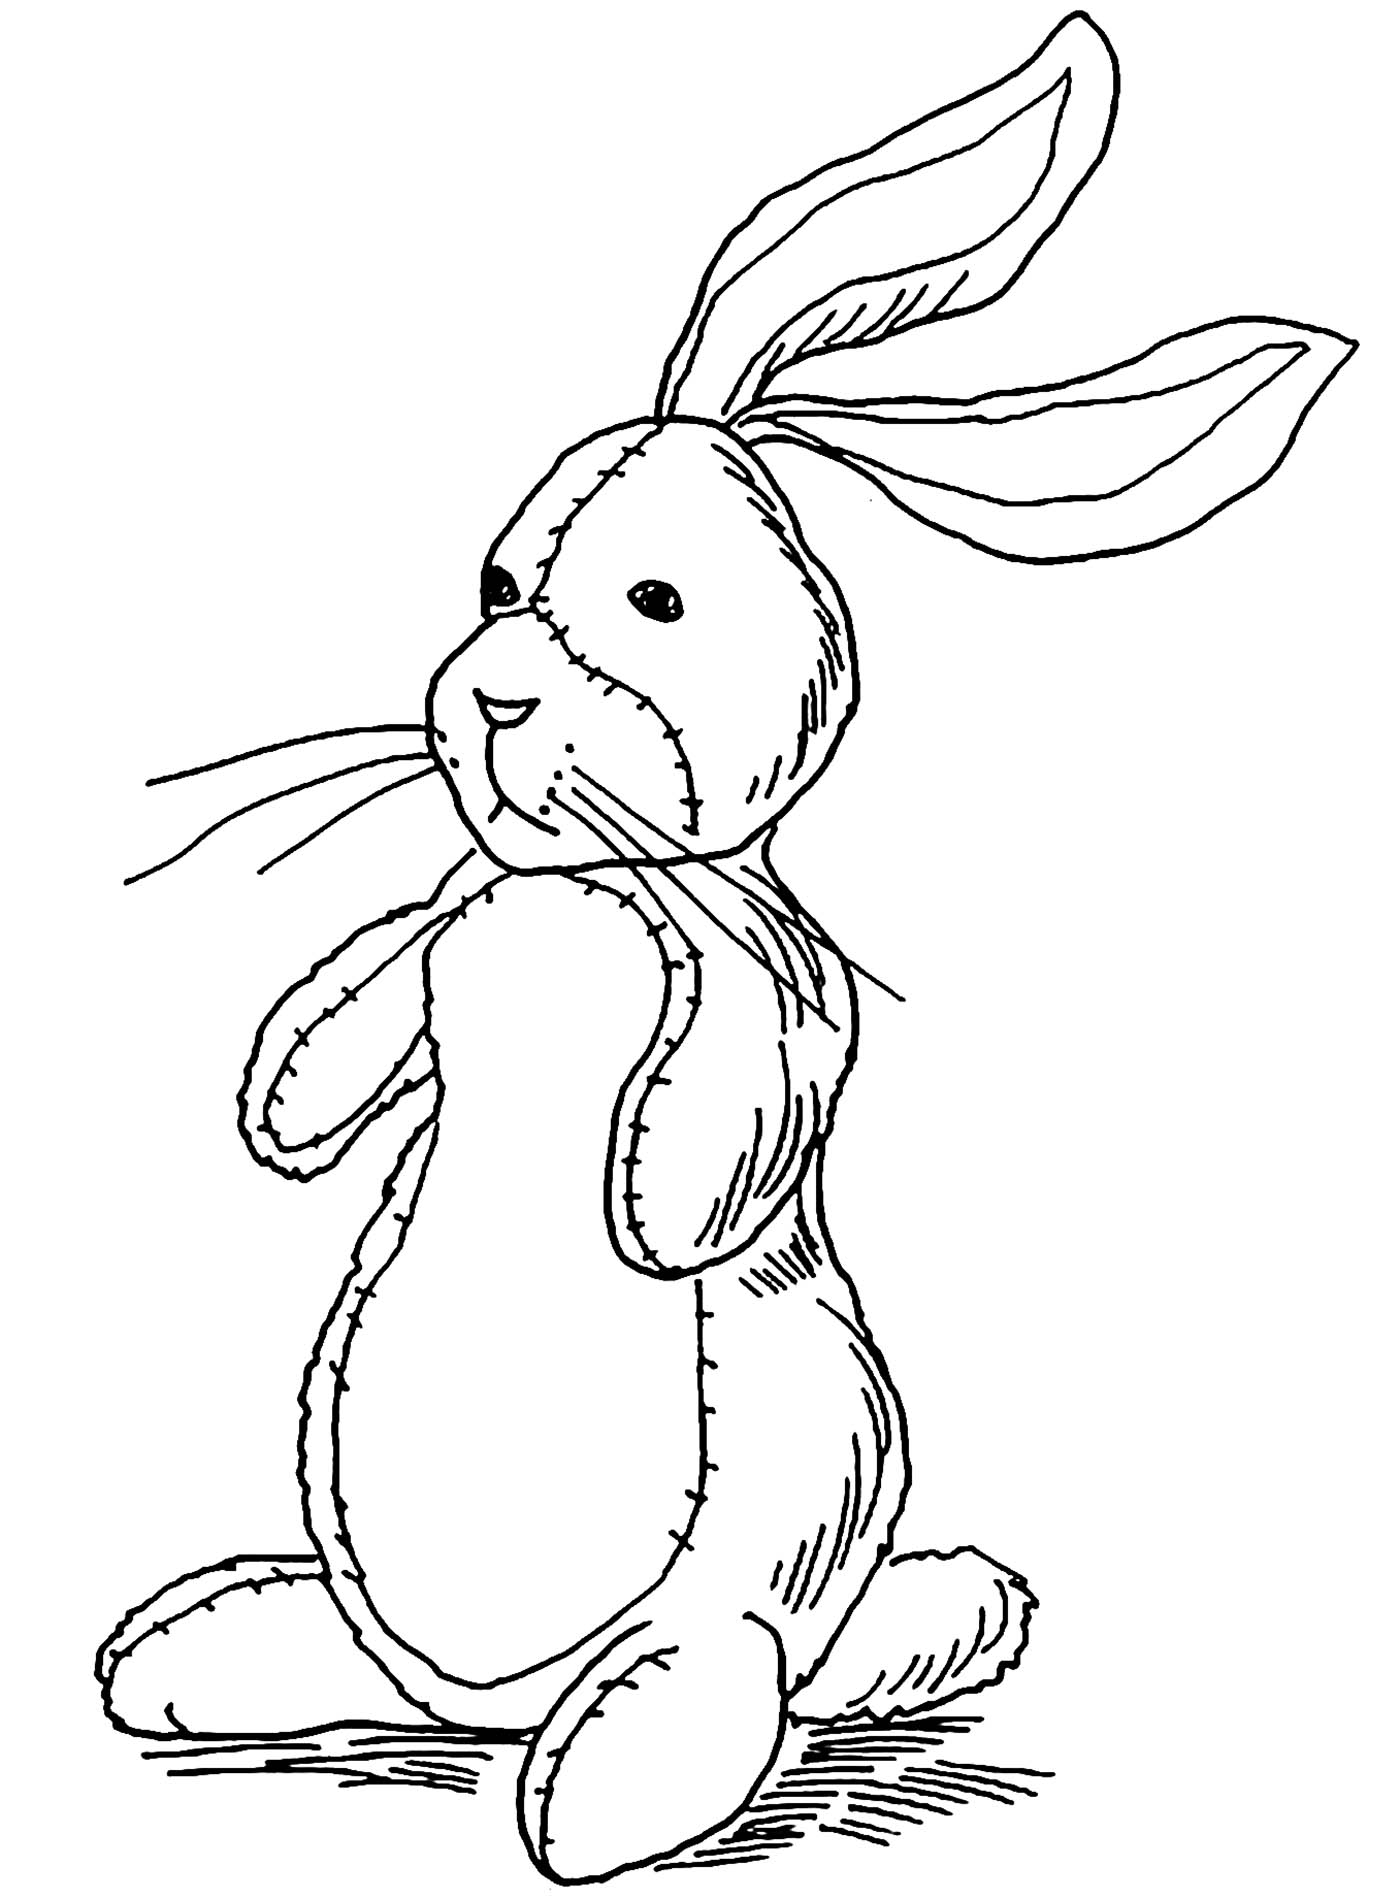 Rabbit to color for children Rabbit Kids Coloring Pages